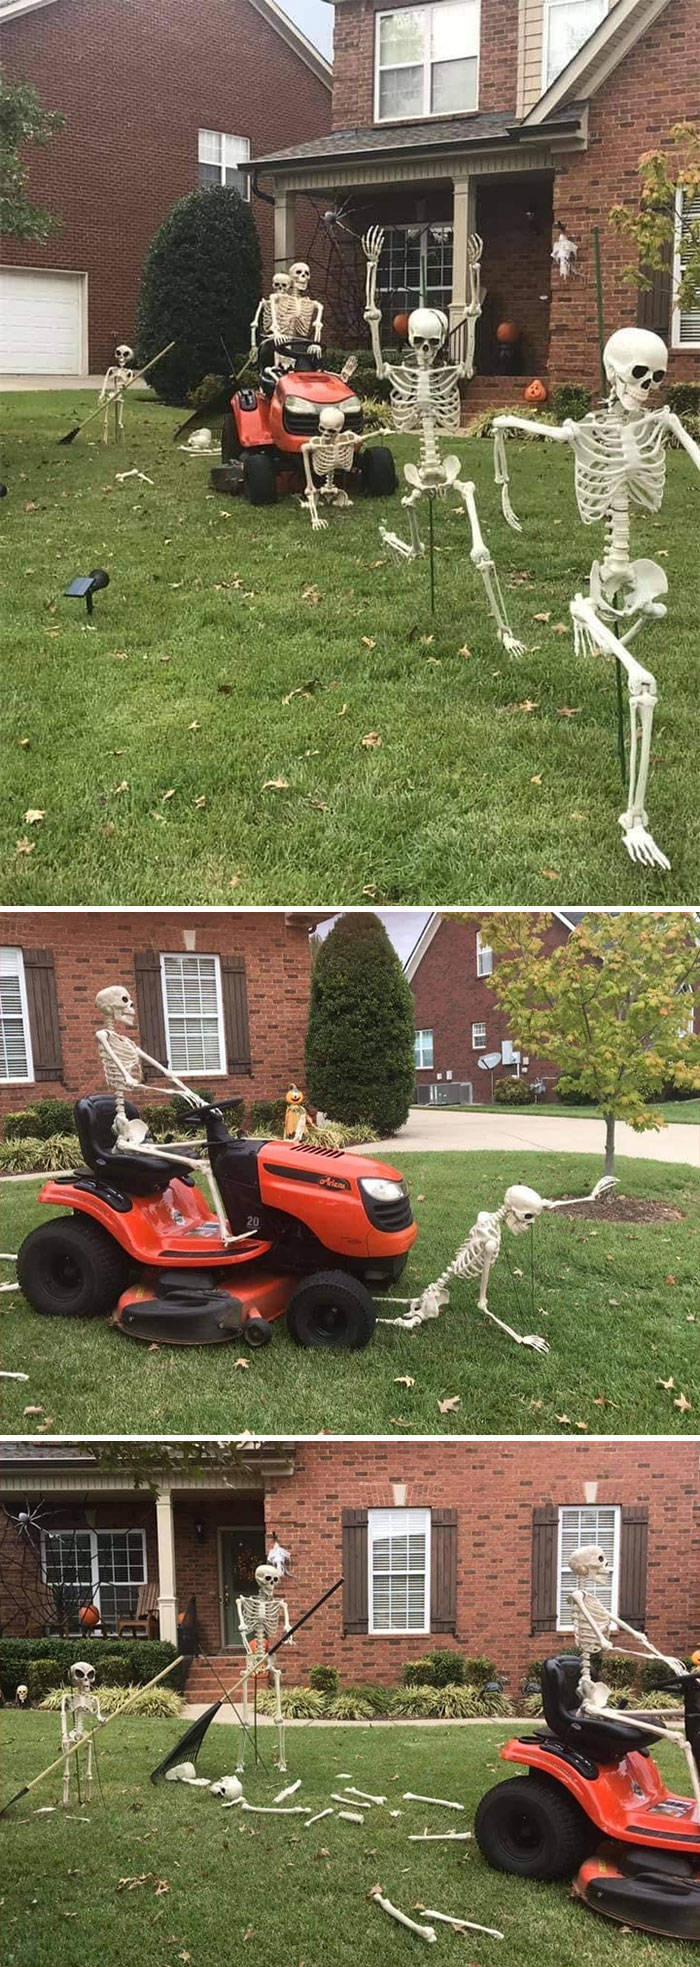 These Halloween Decorations Are Rather Scary… (38 PICS)